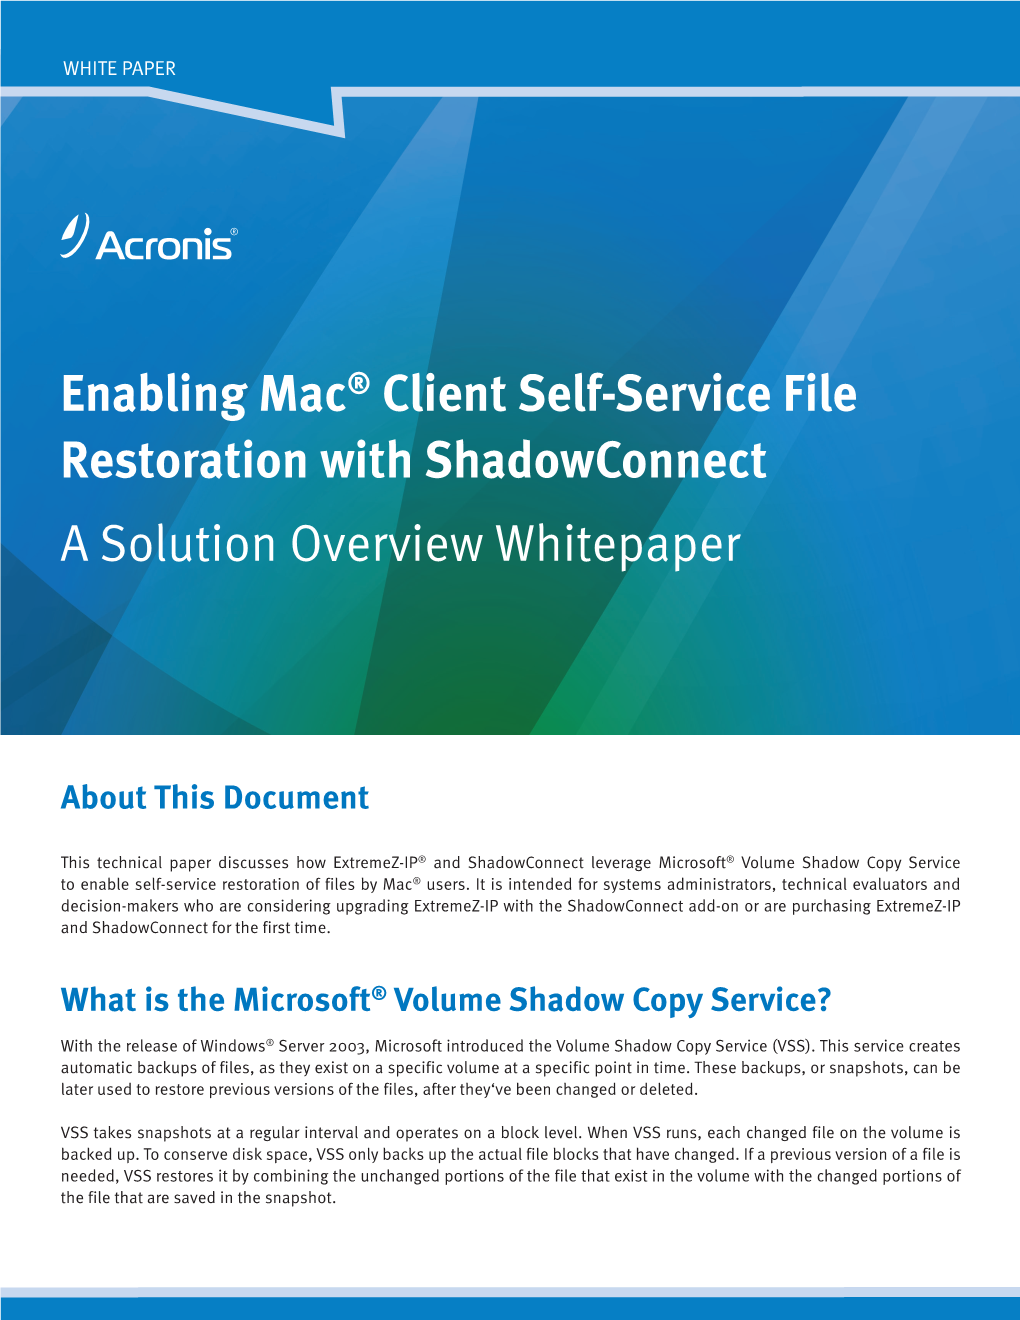 Enabling Mac® Client Self-Service File Restoration with Shadowconnect a Solution Overview Whitepaper